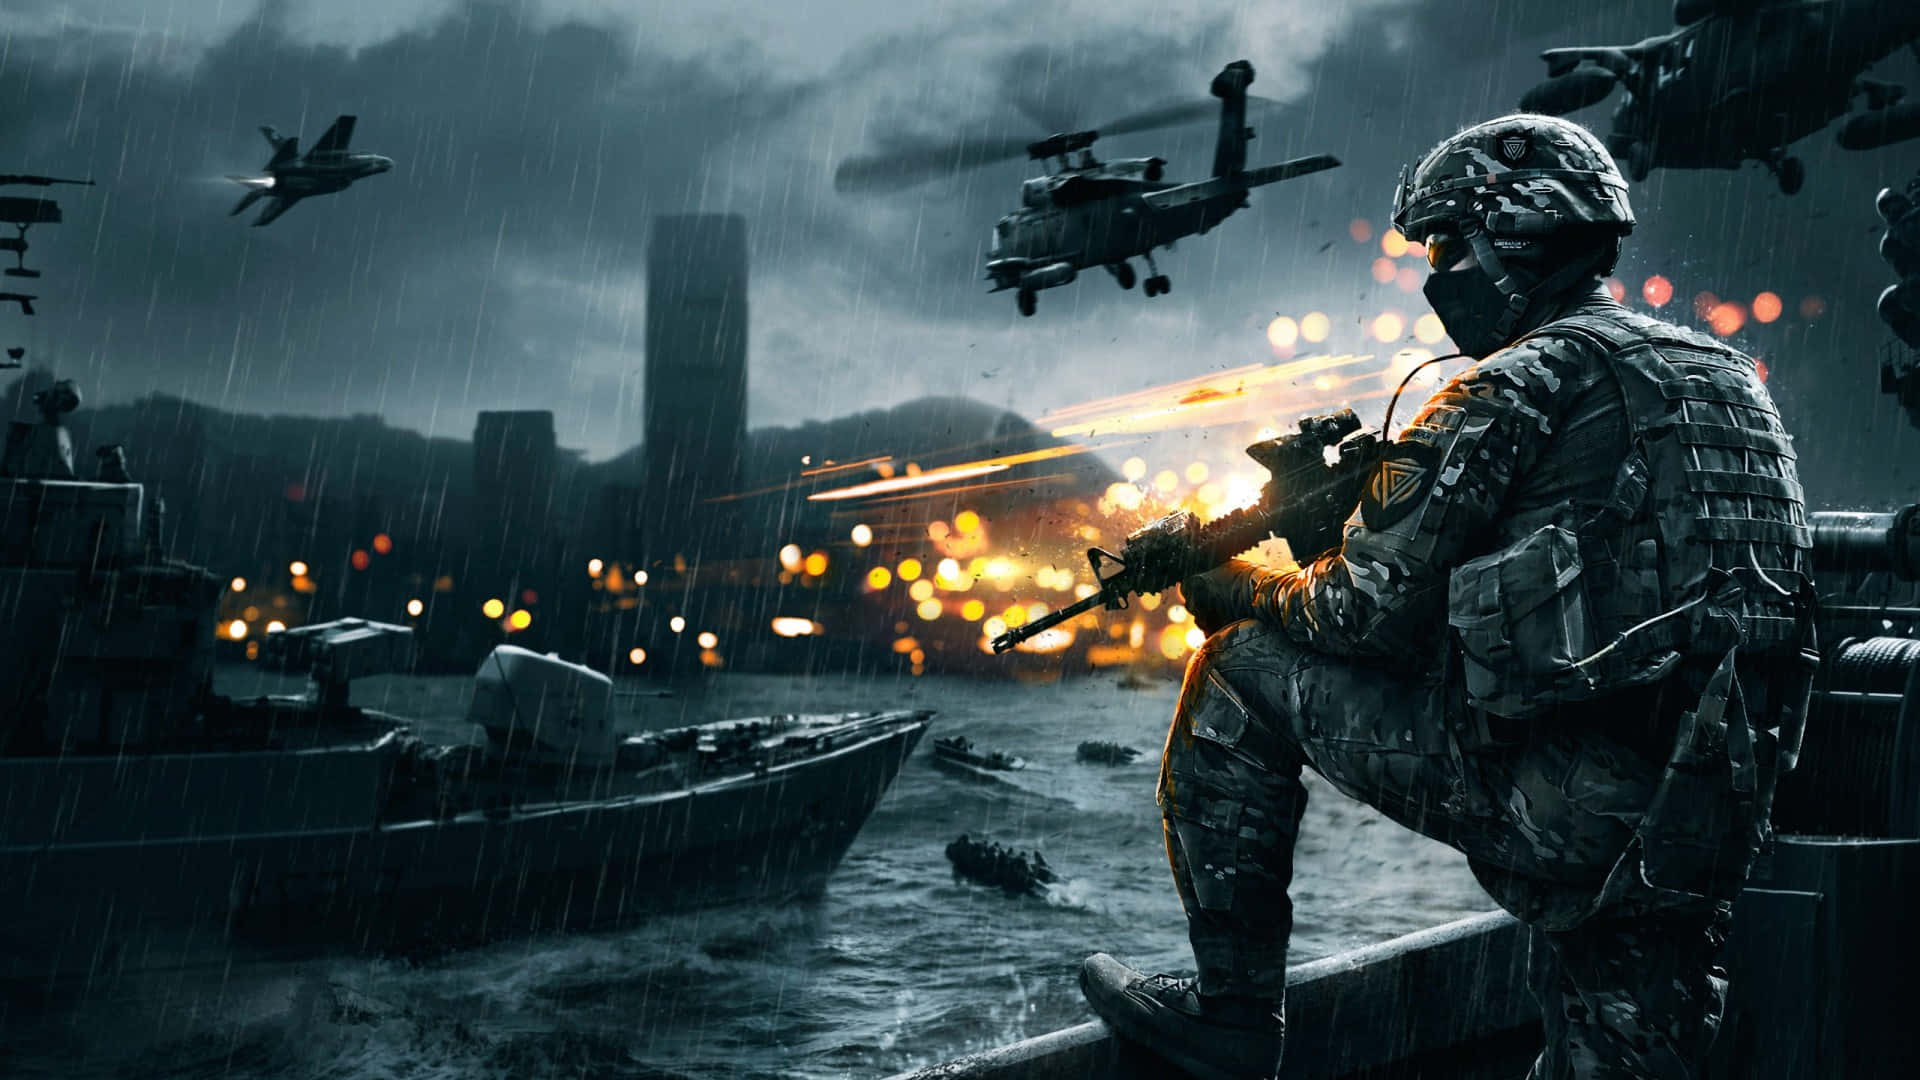 A Soldier Is Standing On A Boat In The Rain